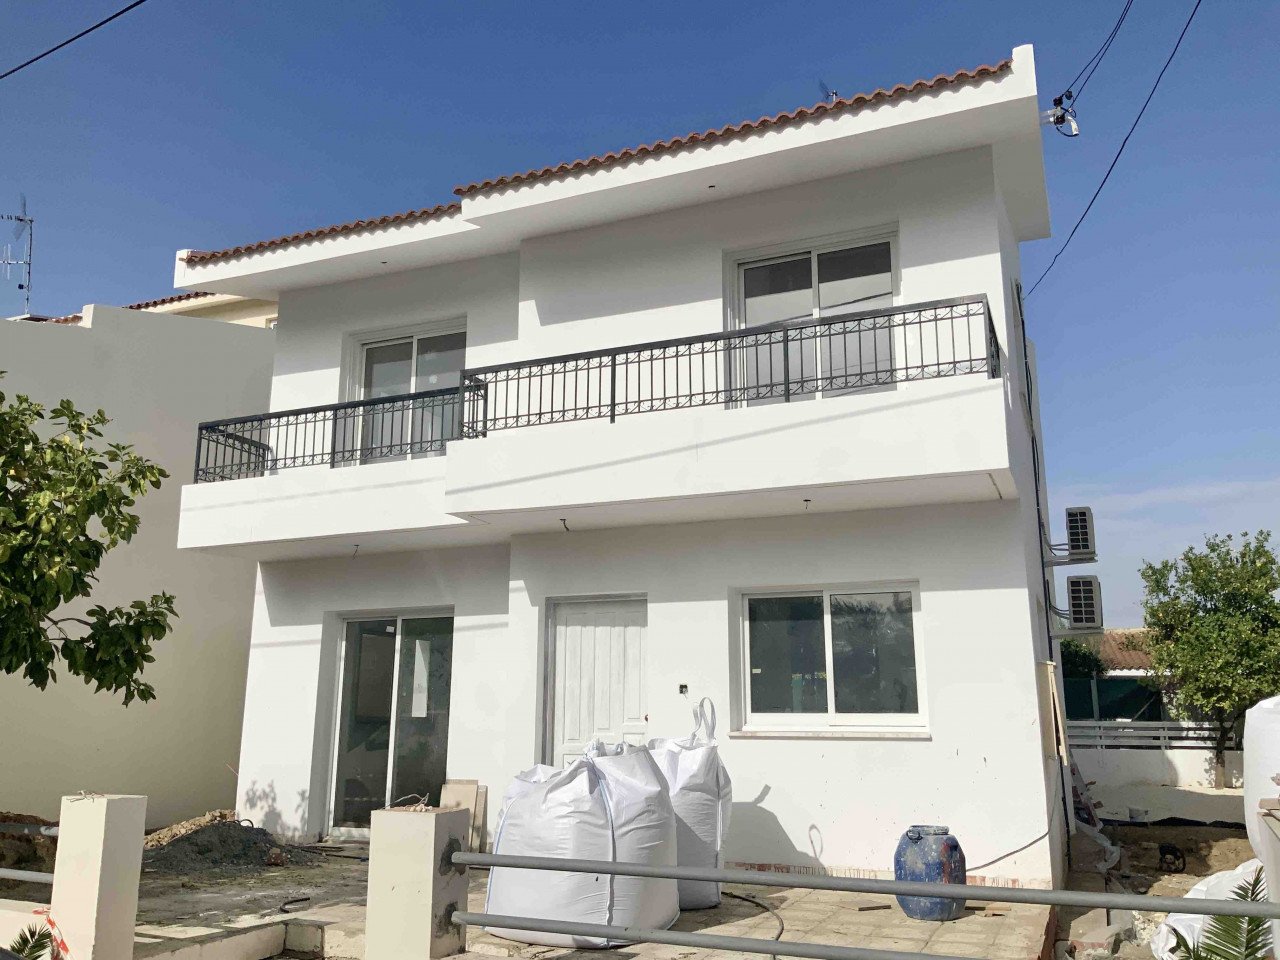 Property for Rent: House (Detached) in Latsia, Nicosia for Rent | Key Realtor Cyprus